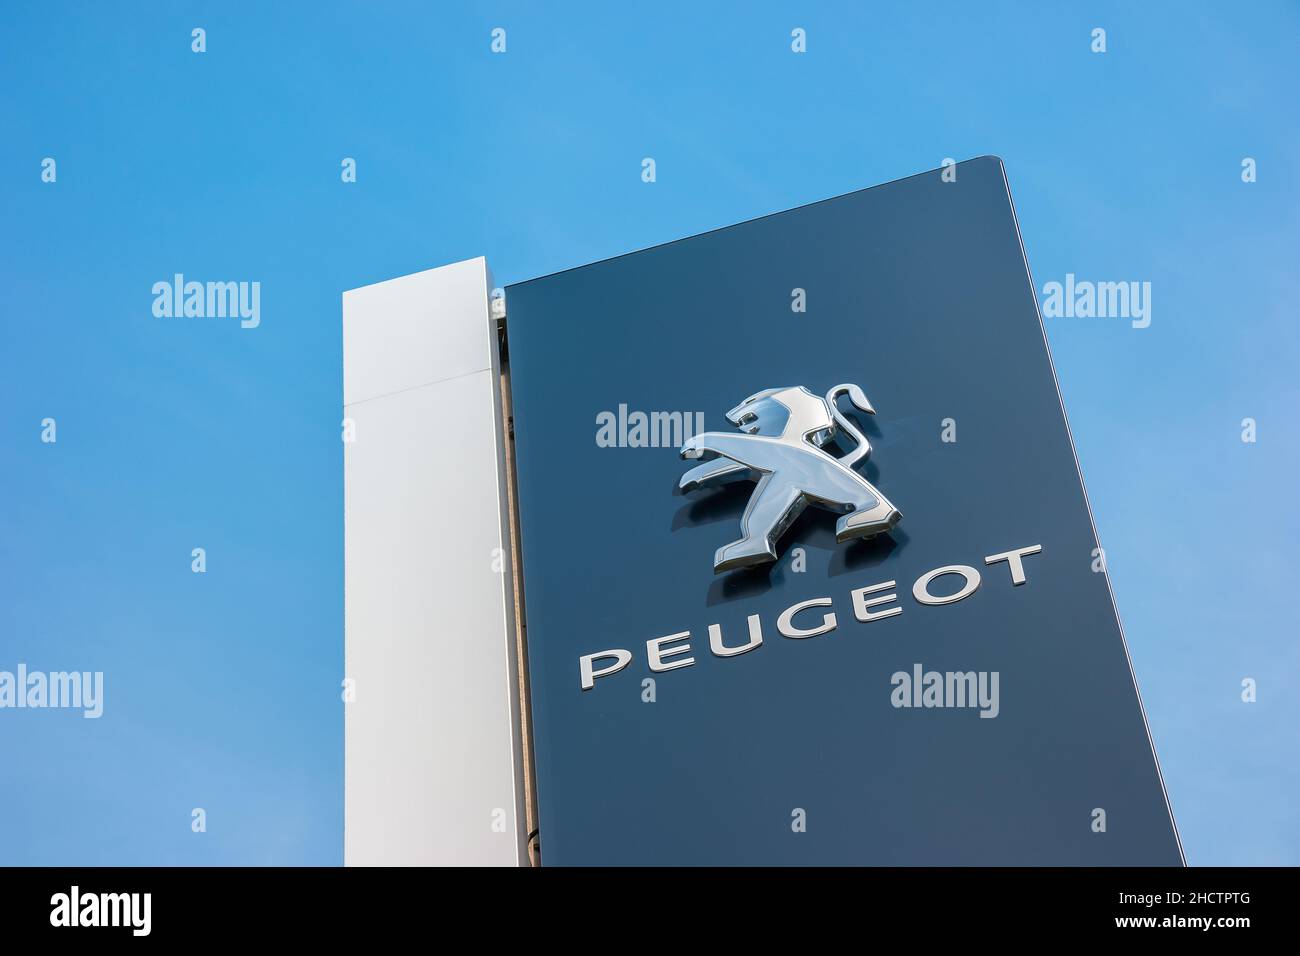 Peugeot dealership sign closeup against blue sky. Peugeot is a French automobile manufacturer and part of Groupe PSA. Stock Photo